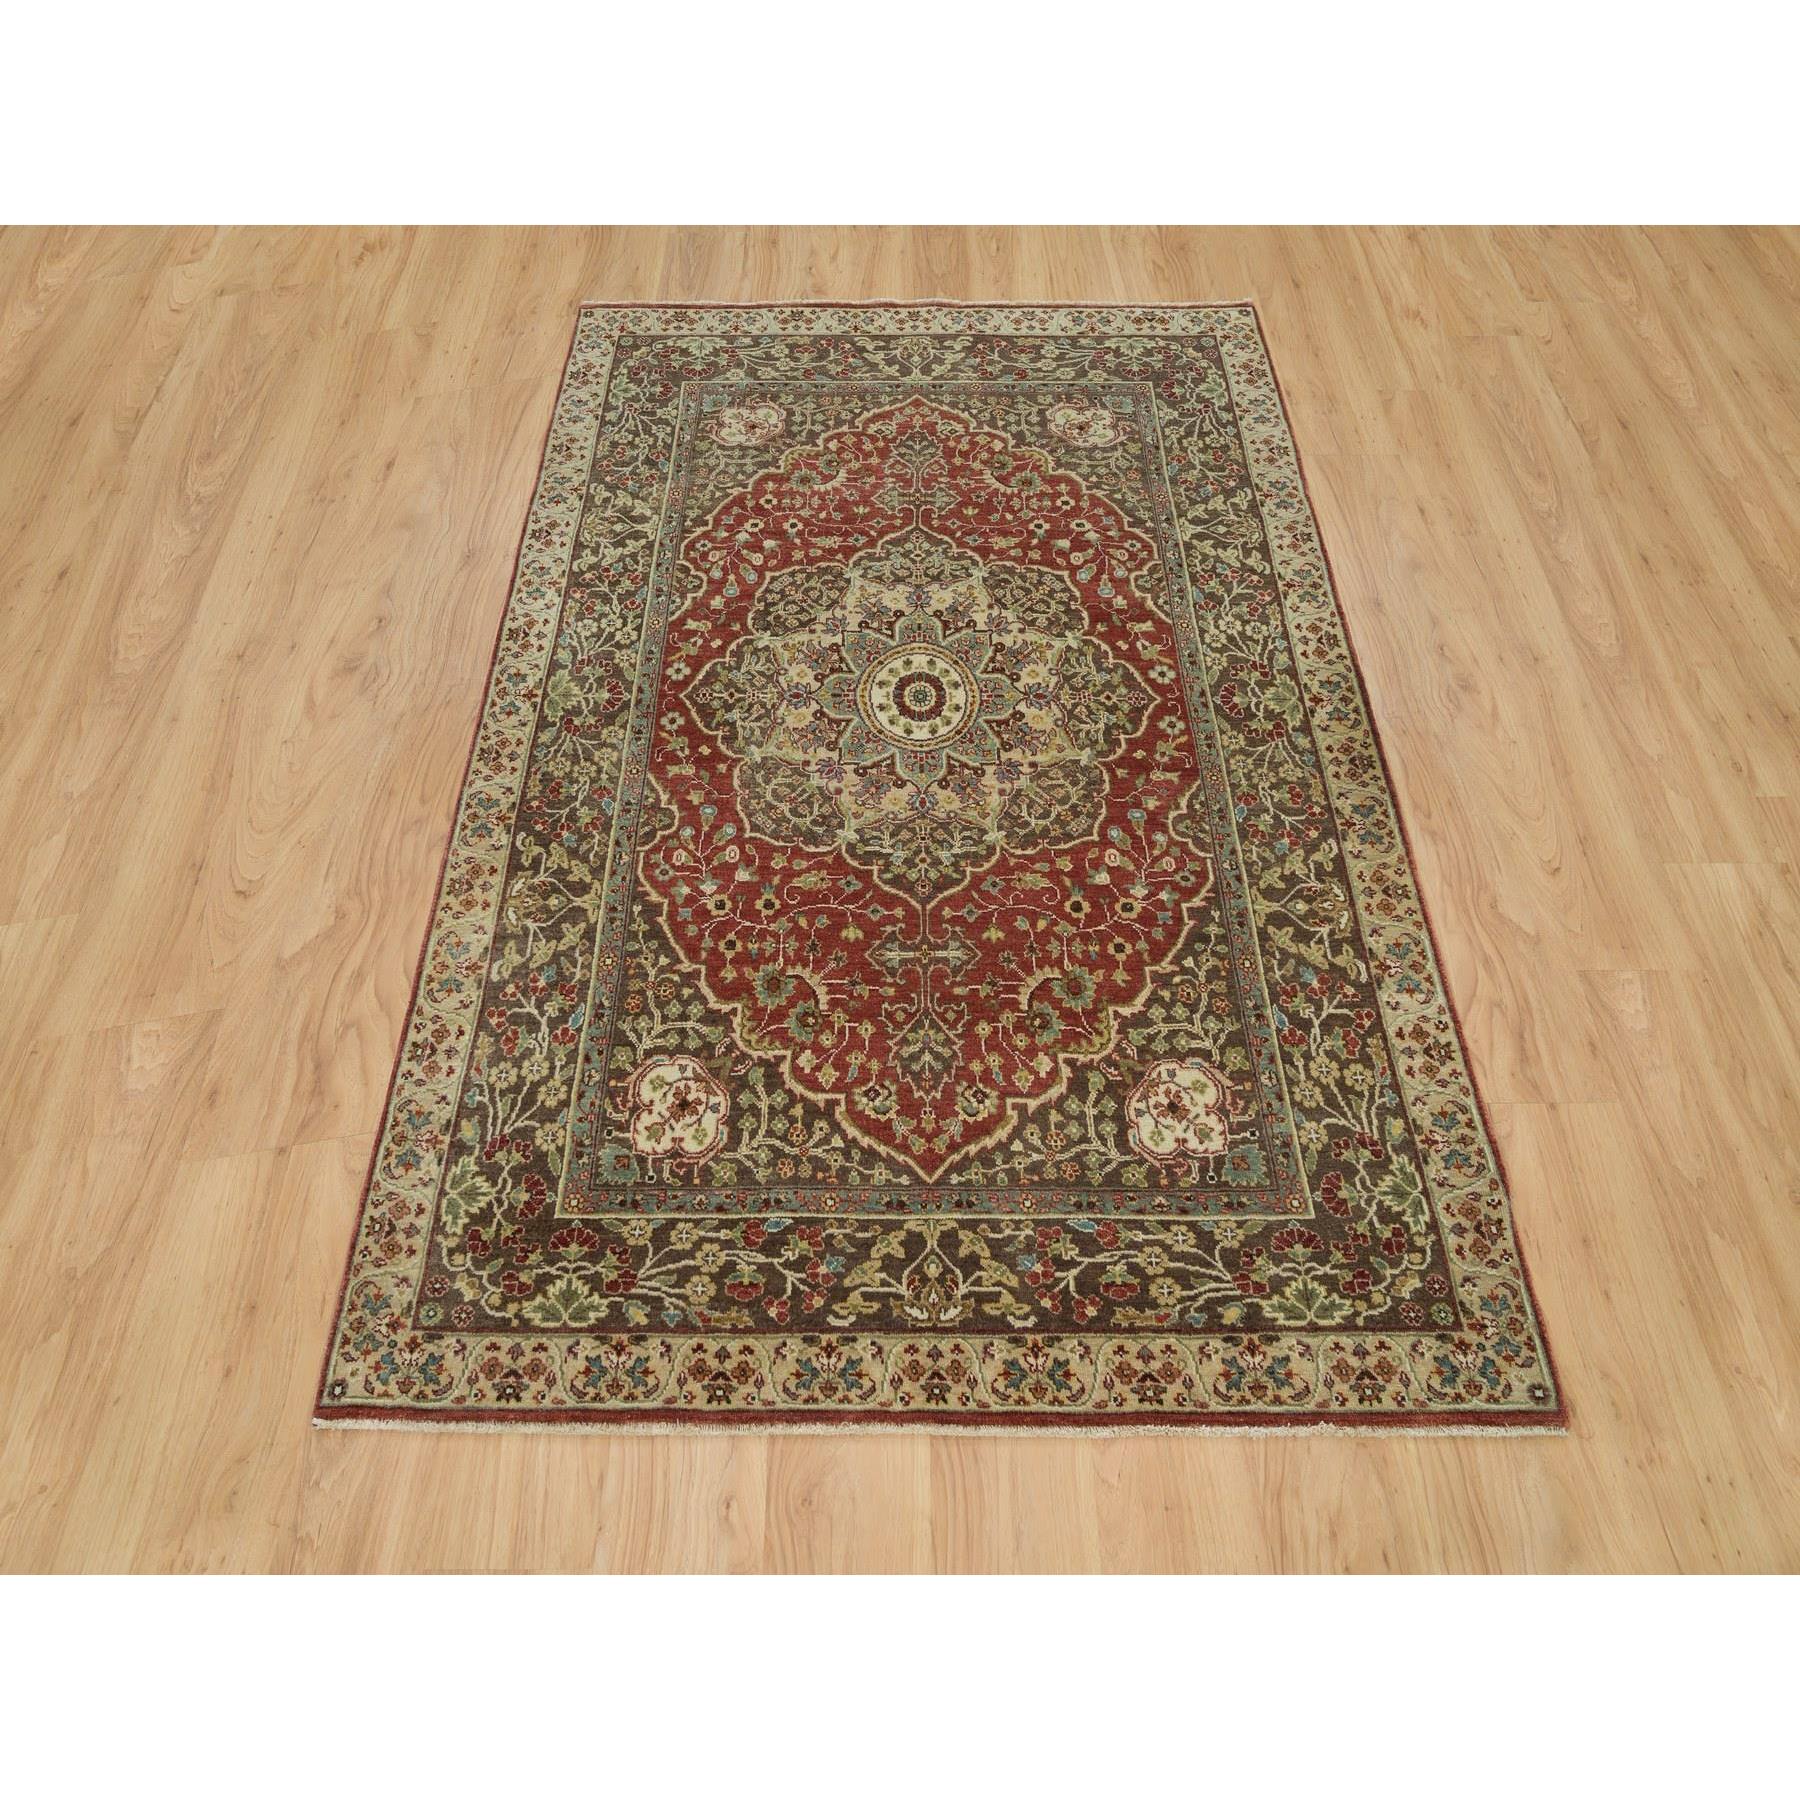 5'x7' Currant Red with Grayish Brown Corners, Soft Pile, Pure Wool Hand Woven, Antiqued Tabriz Haji Jalili Design, Natural Dyes, Dense Weave, Oriental Rug 